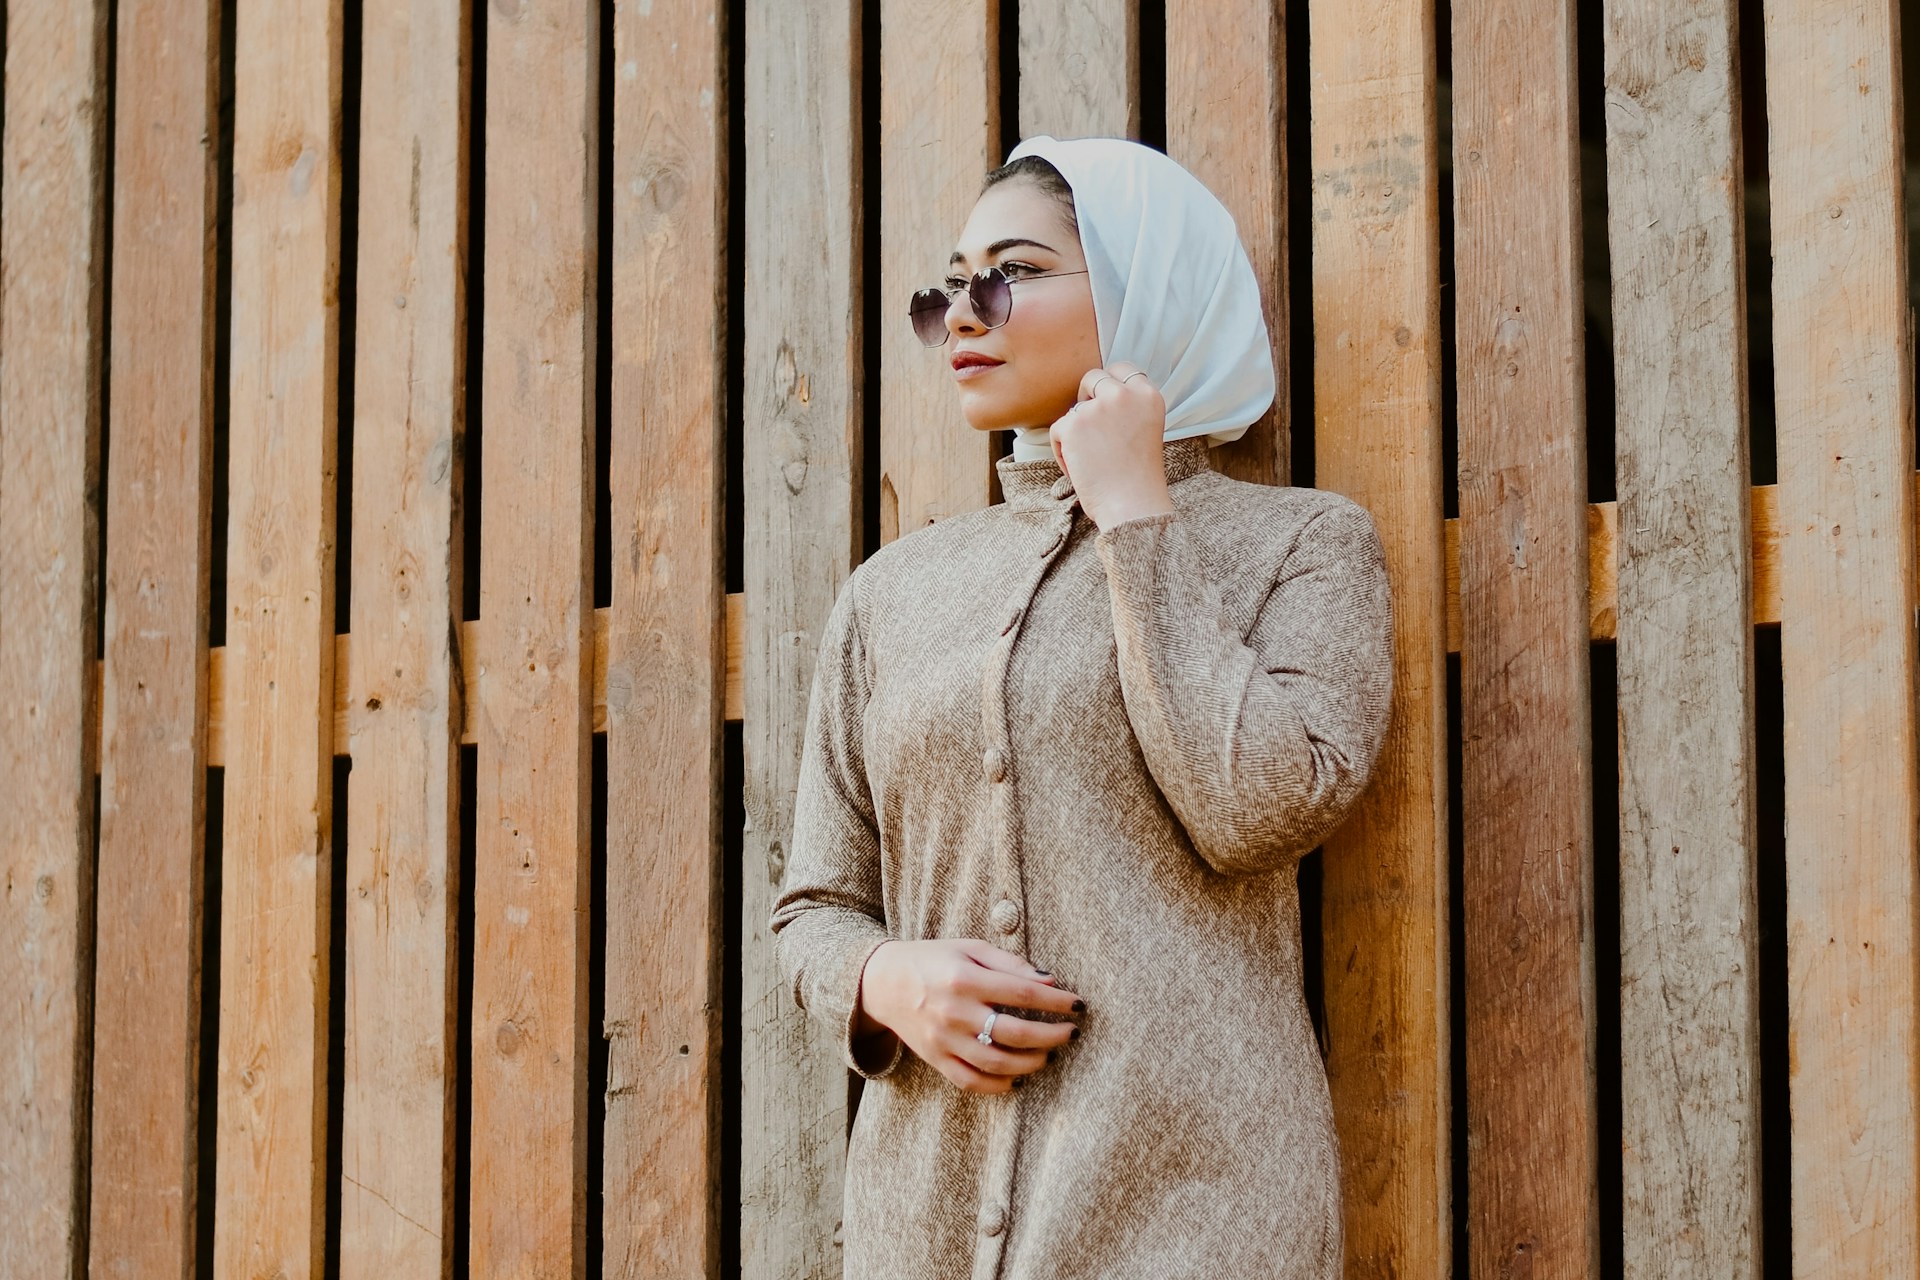 arab woman wearing sunglasses standing against wooden wall